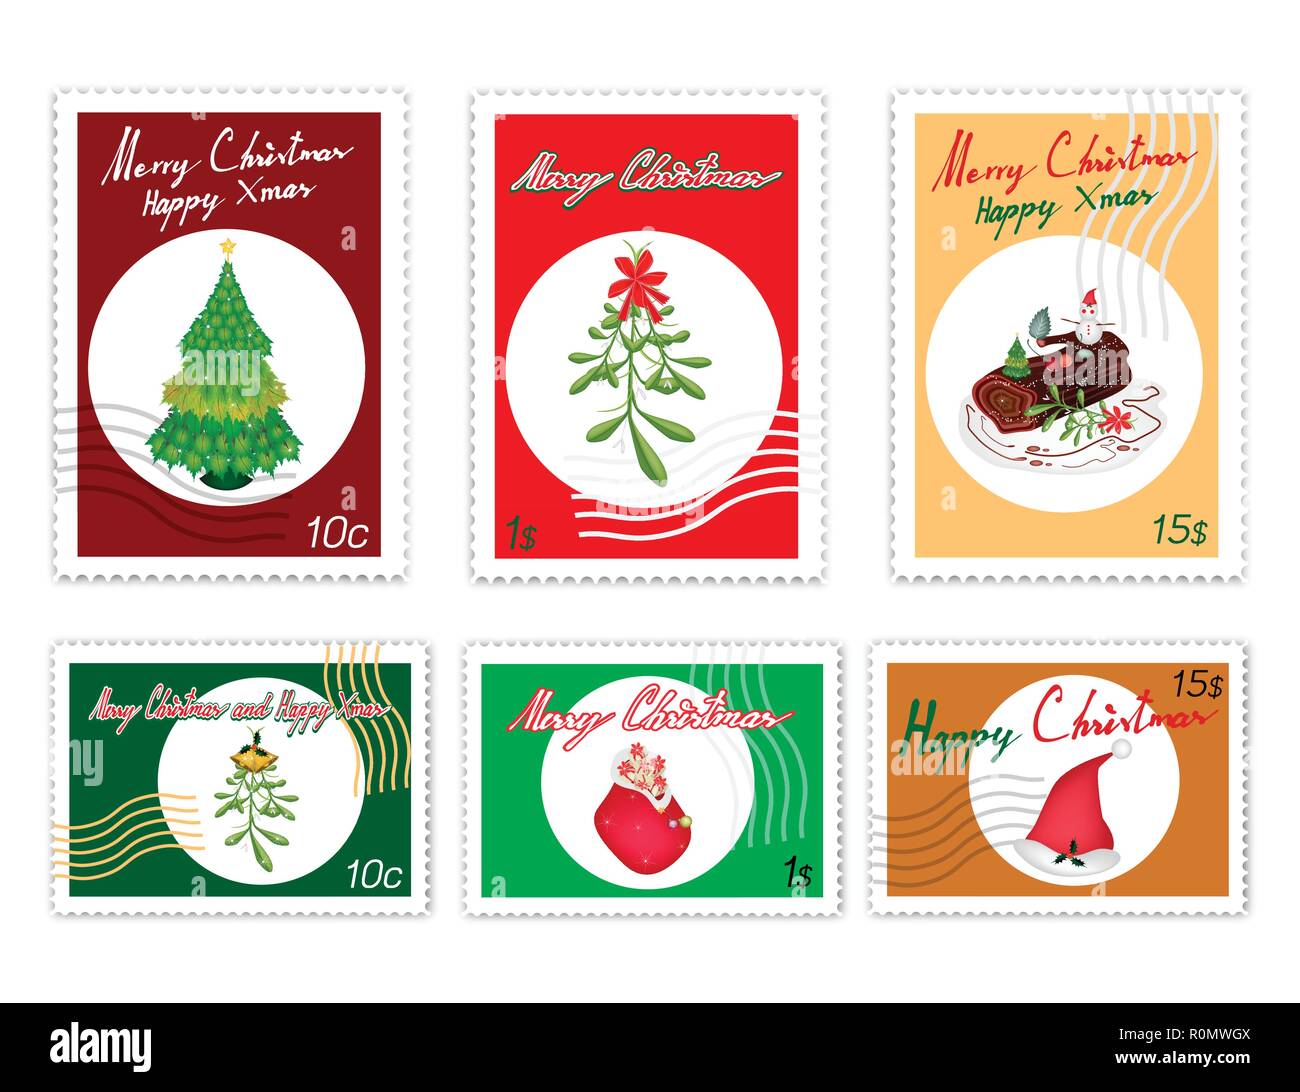 Merry Xmas, Post Stamps Set of Hand Drawn Sketch of Christmas Tree, Mistletoe, Yule Log Cake, Santa Bag and Hat. Sign for Christmas Celebration. Stock Vector